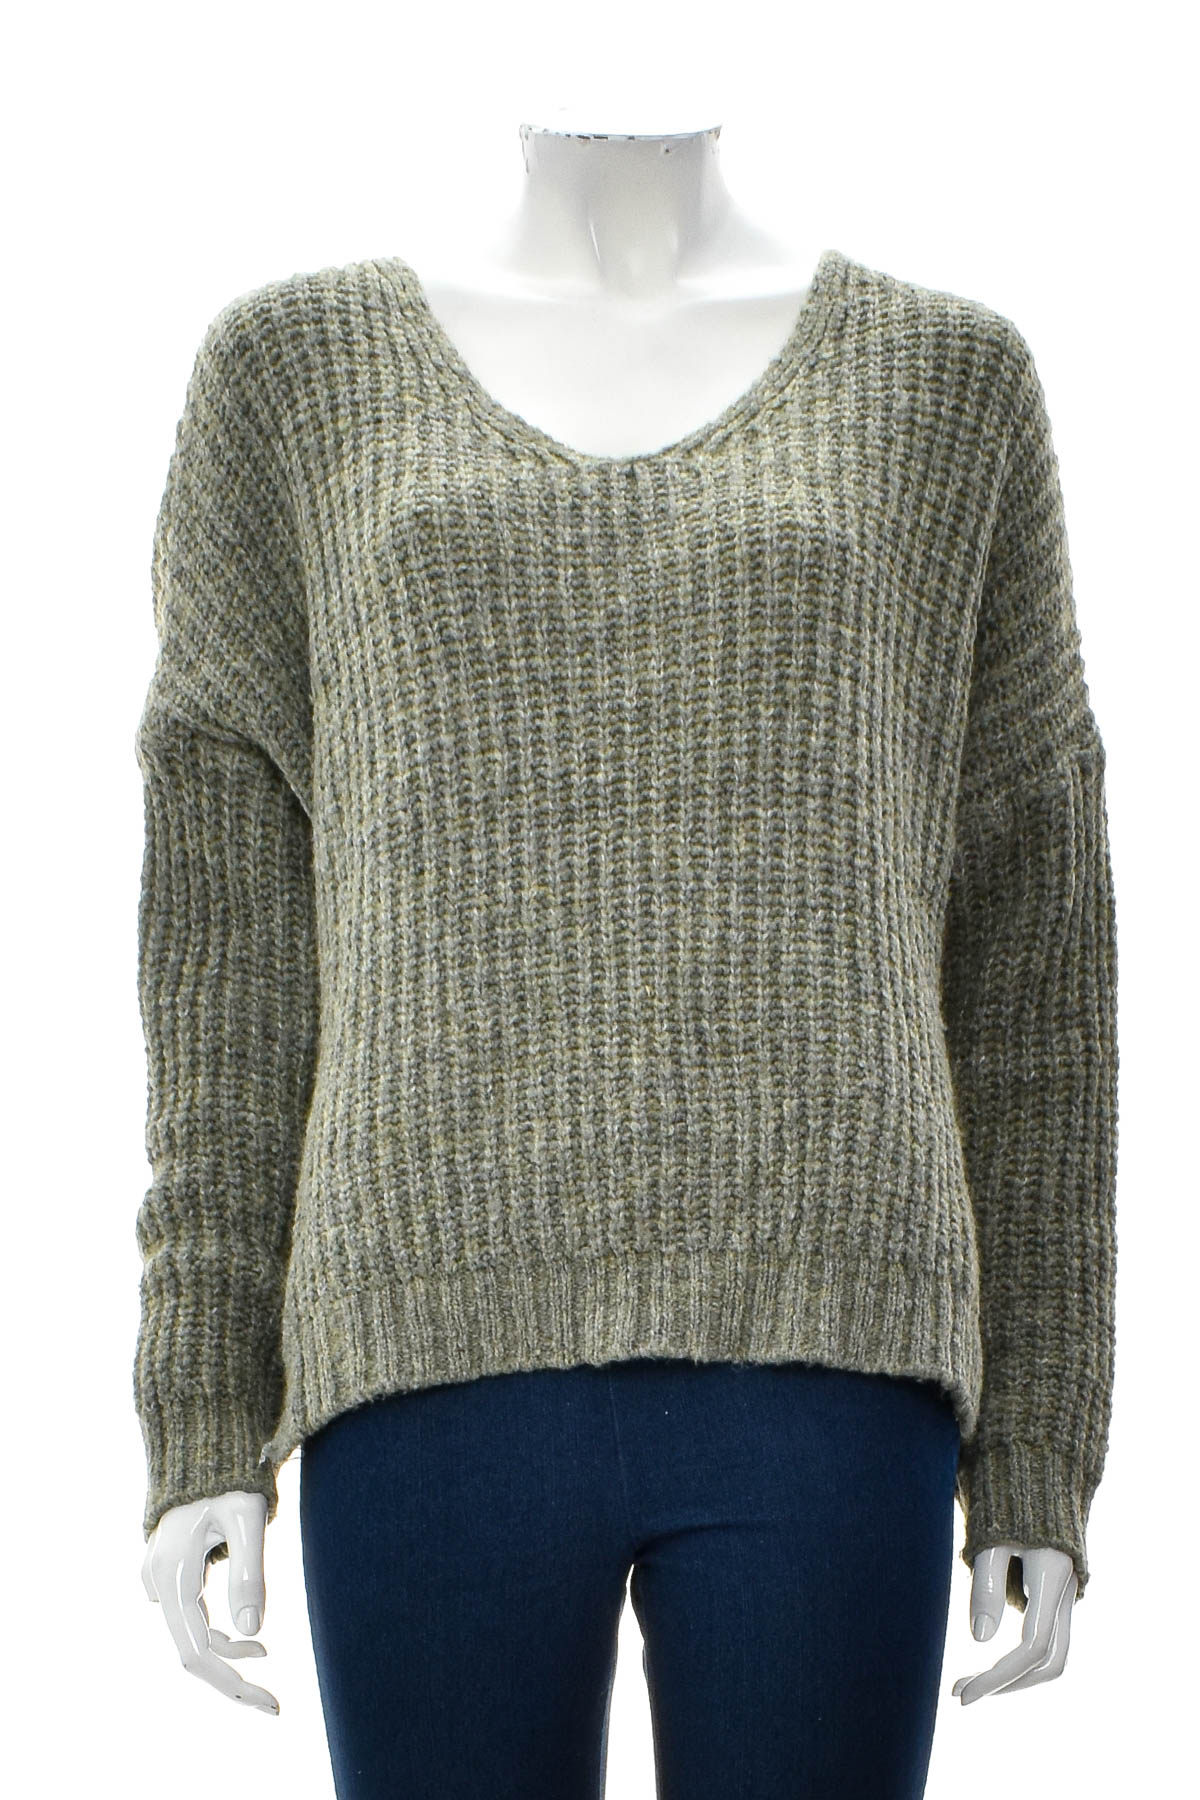 Women's sweater - Made in Italy - 0